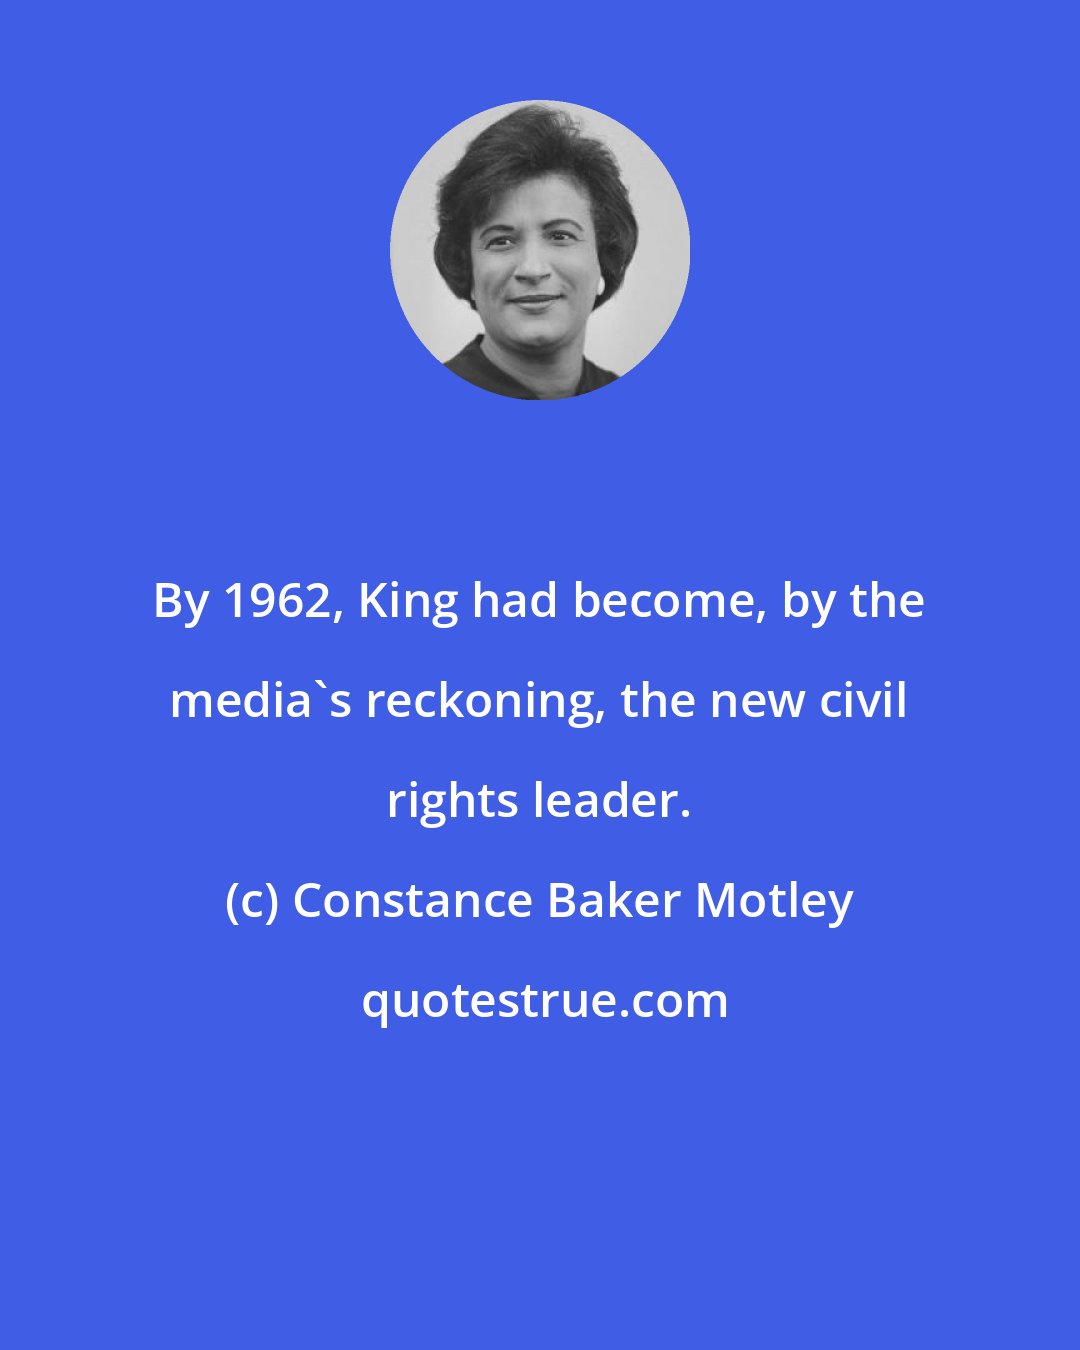 Constance Baker Motley: By 1962, King had become, by the media's reckoning, the new civil rights leader.